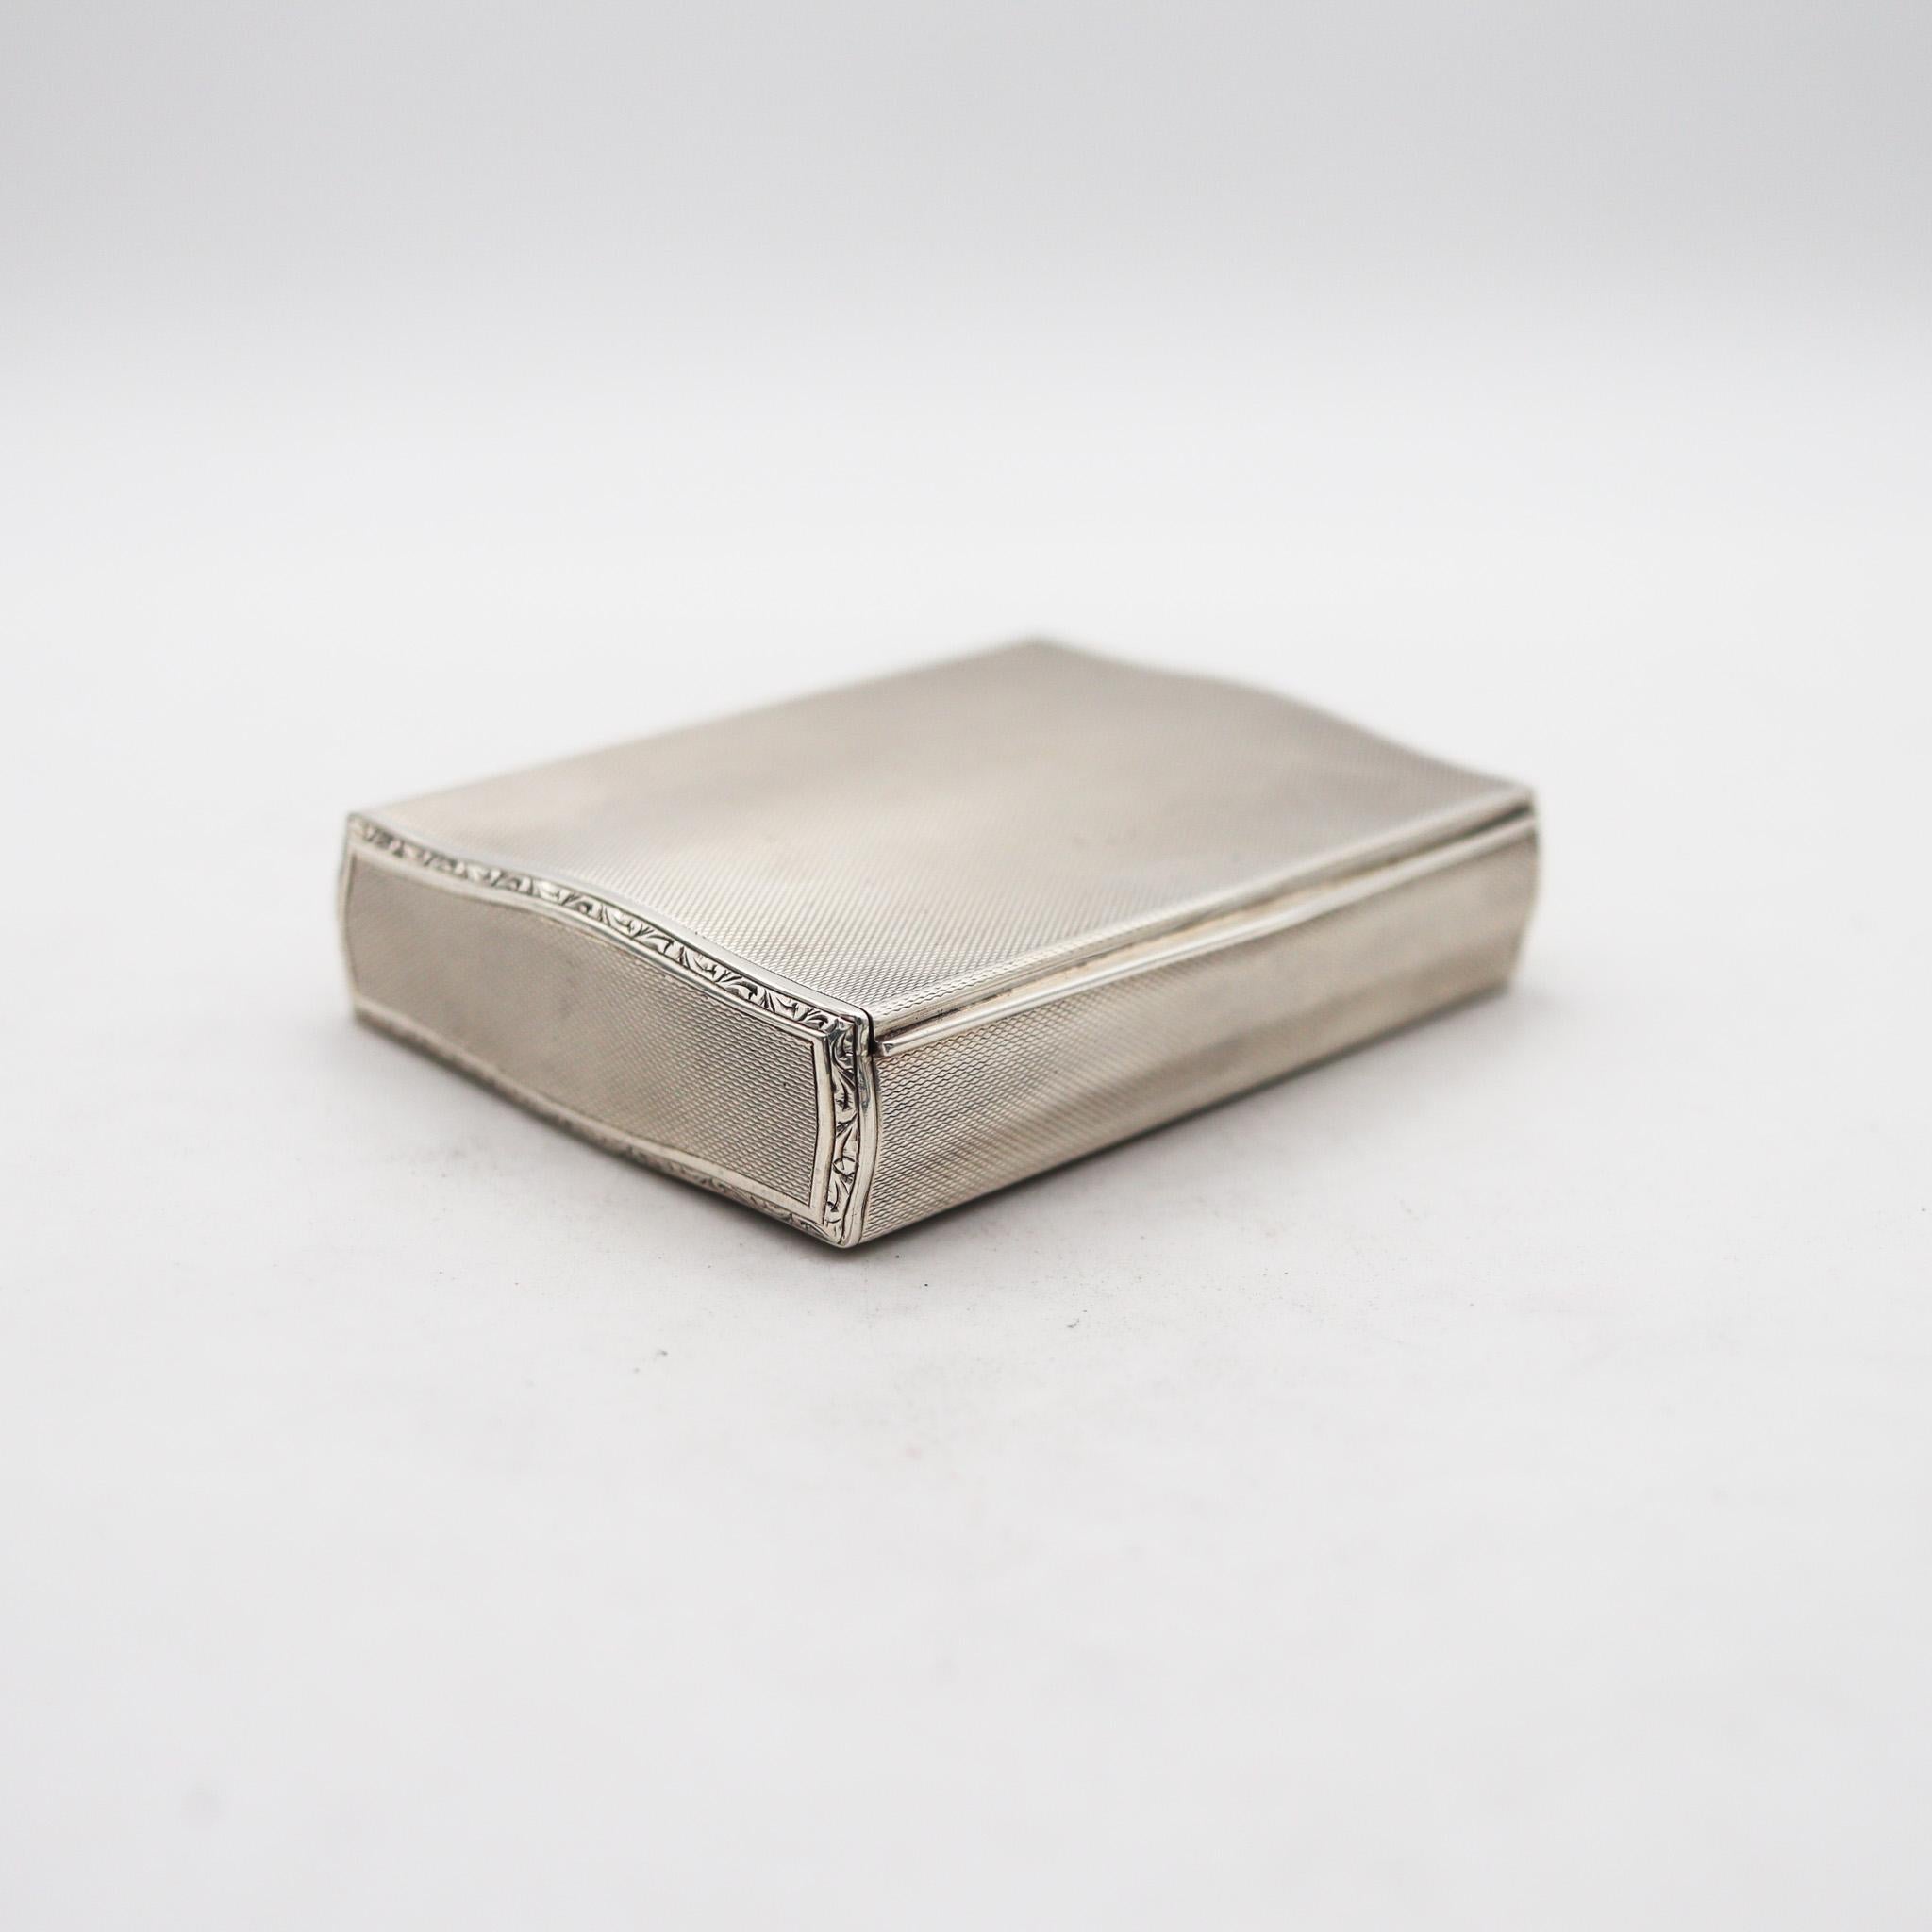 A guilloche box made in Germany

Beautiful box created in Germany during the art deco period, circa 1925. This exceptional cigarette-snuff box was carefully crafted with a wavy rectangular shape in solid .935/.999 standard silver with rich gilded